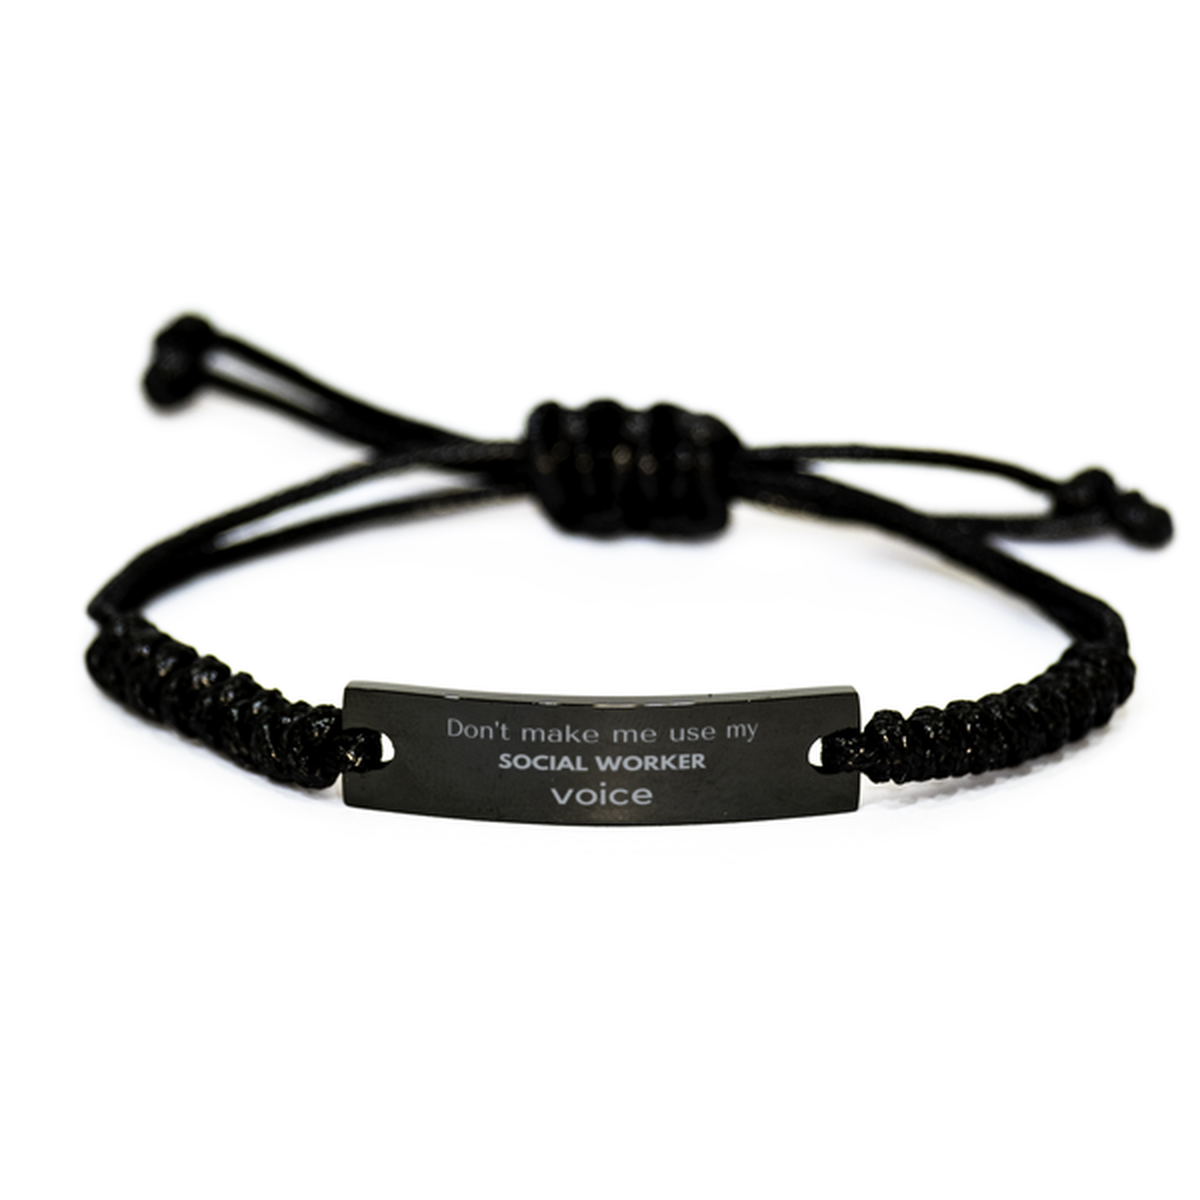 Don't make me use my Social Worker voice, Sarcasm Social Worker Gifts, Christmas Social Worker Black Rope Bracelet Birthday Unique Gifts For Social Worker Coworkers, Men, Women, Colleague, Friends